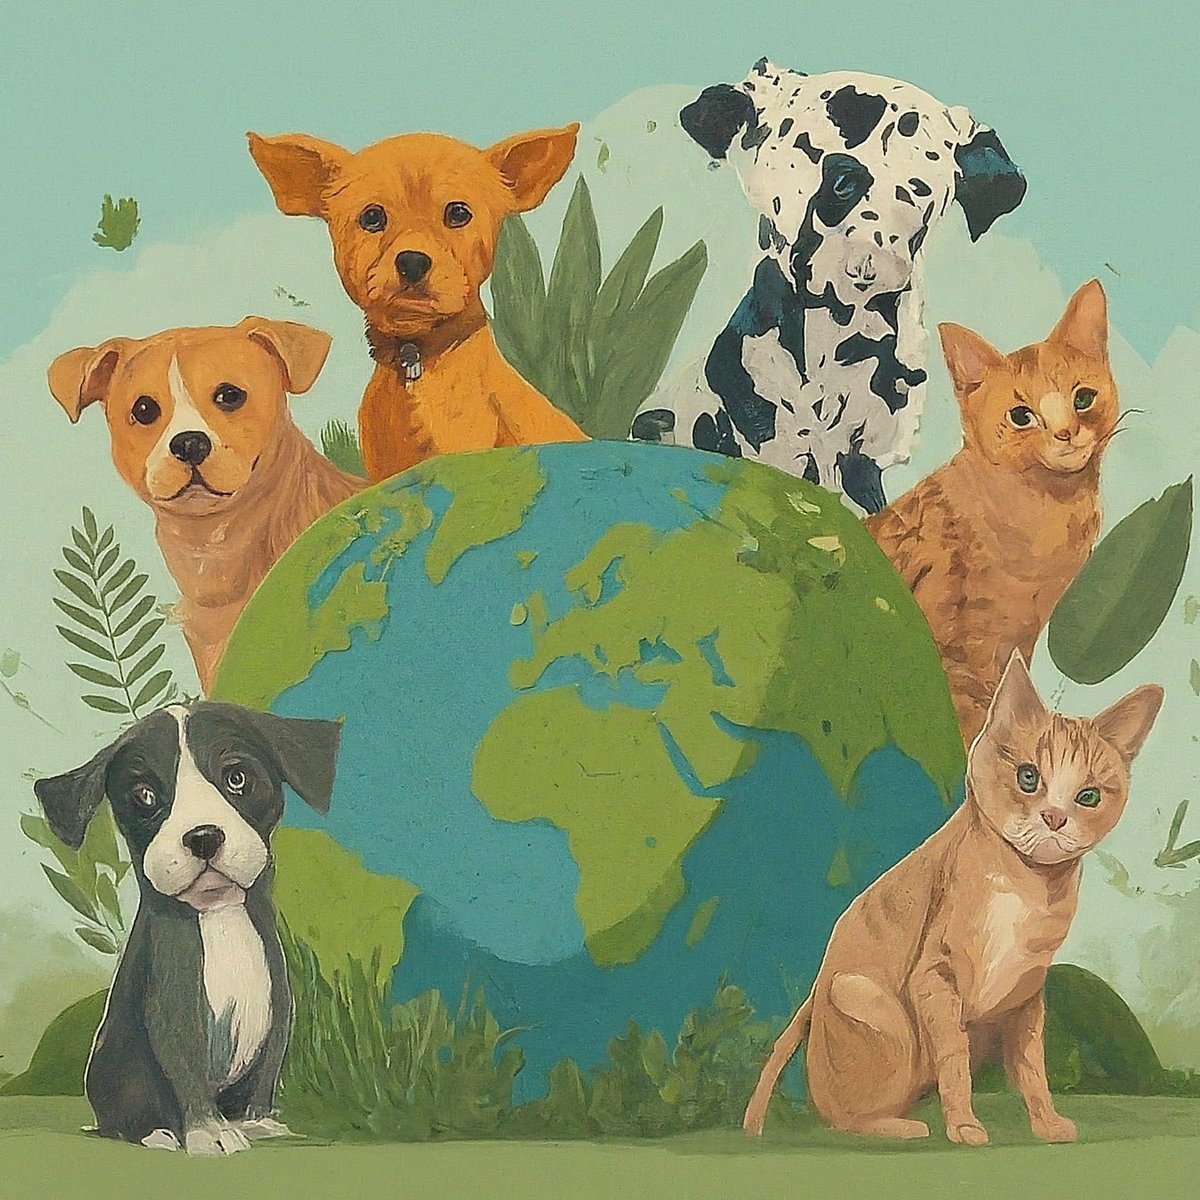 🌎🐾 It's Earth Day! 🌱 Celebrate with your furry friend by taking eco-friendly steps for a greener paw print. Let’s keep the planet beautiful for all beings! #EarthDayPaws #EcoFriendlyPets #GreenPawPrint